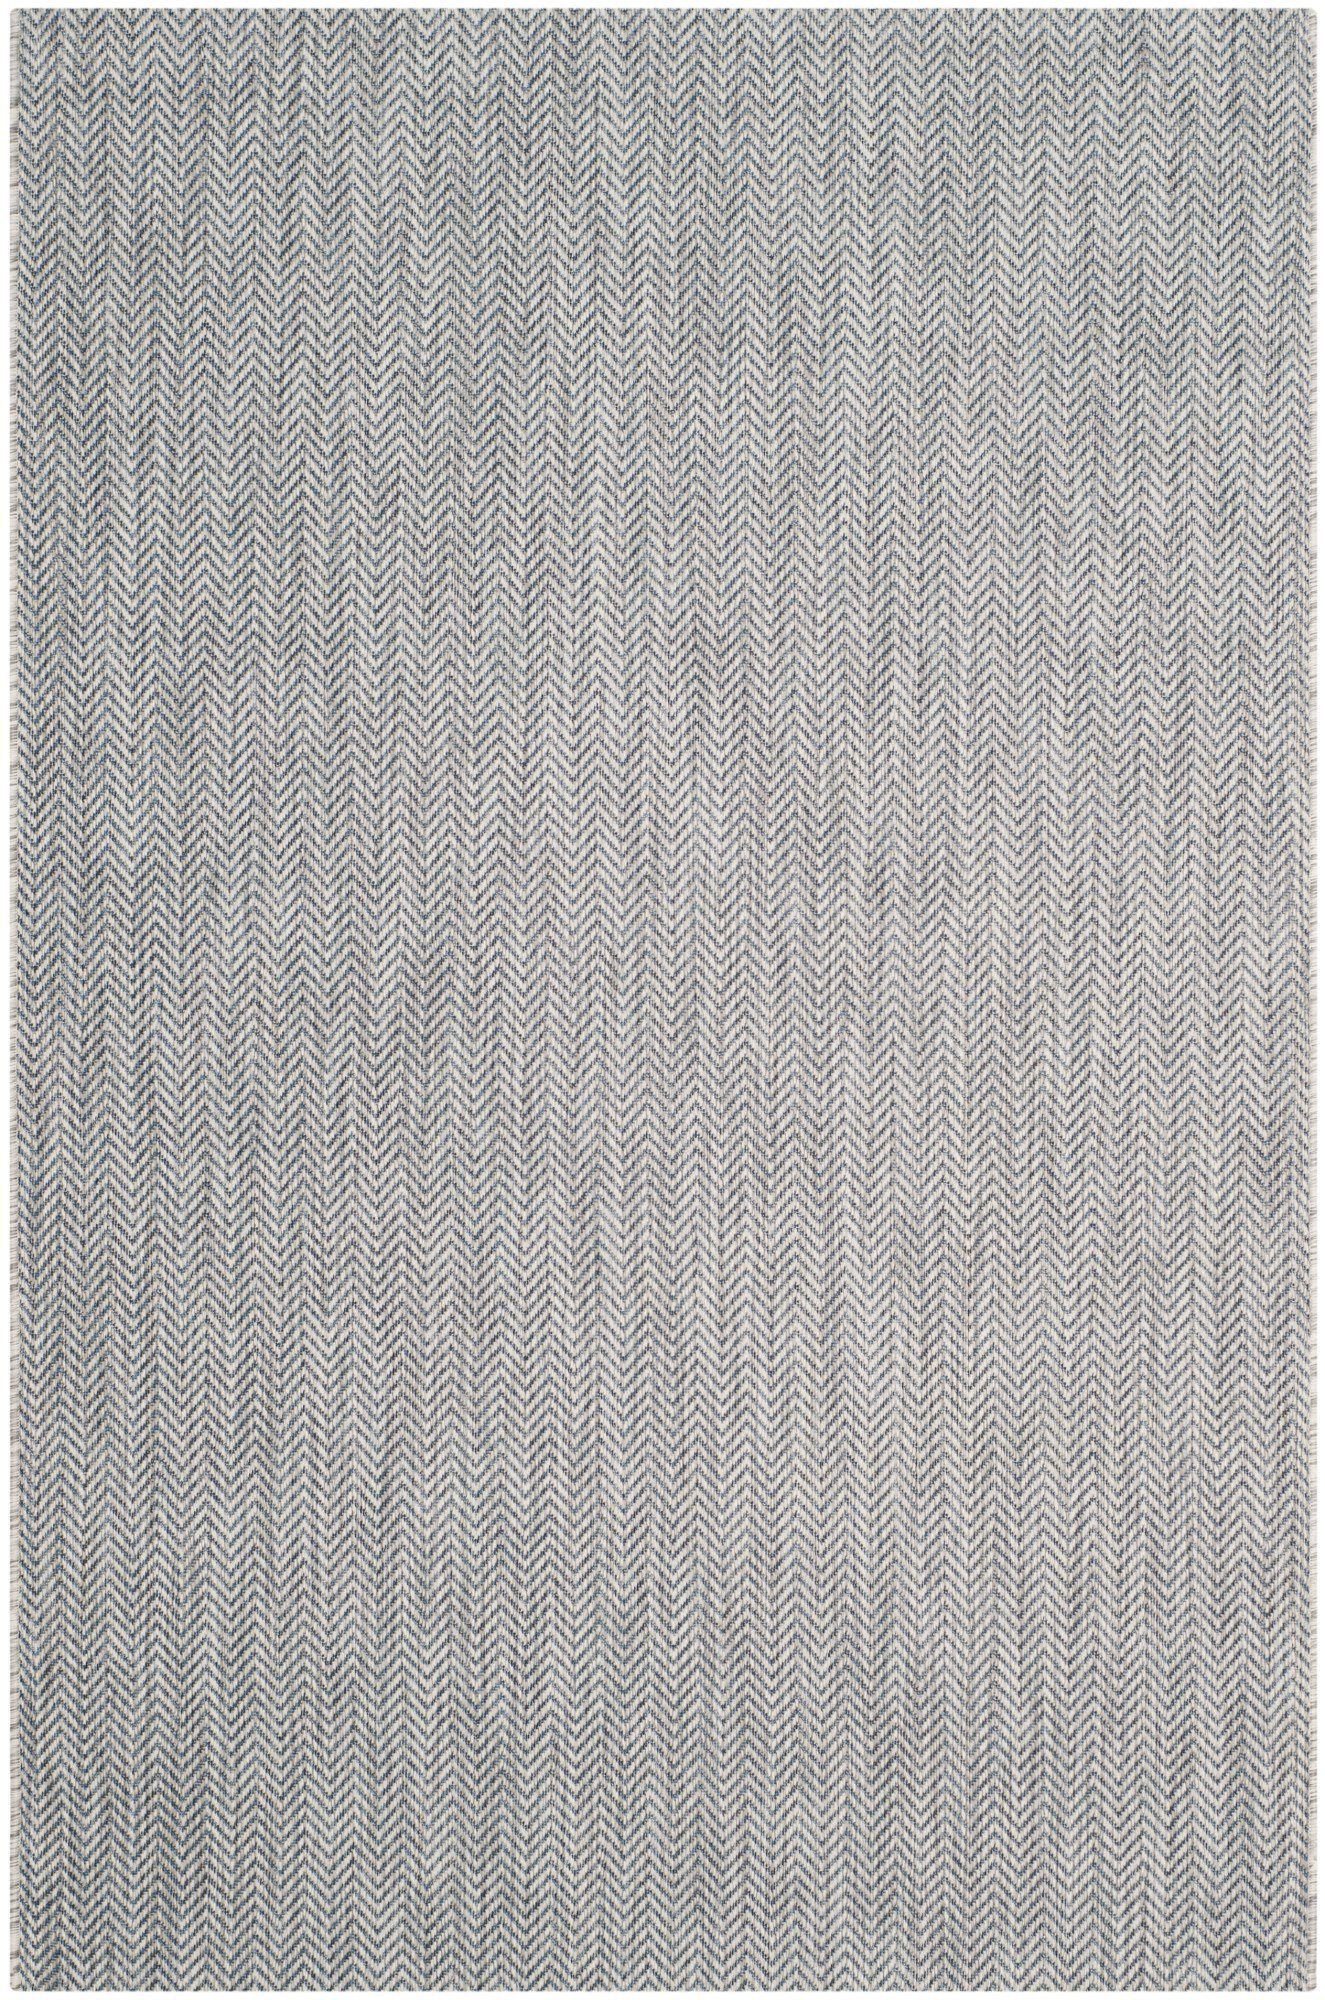 Blue Outdoor Rugs - Indoor/Outdoor Area Rugs (Page 22 of 22) | Rugs Direct